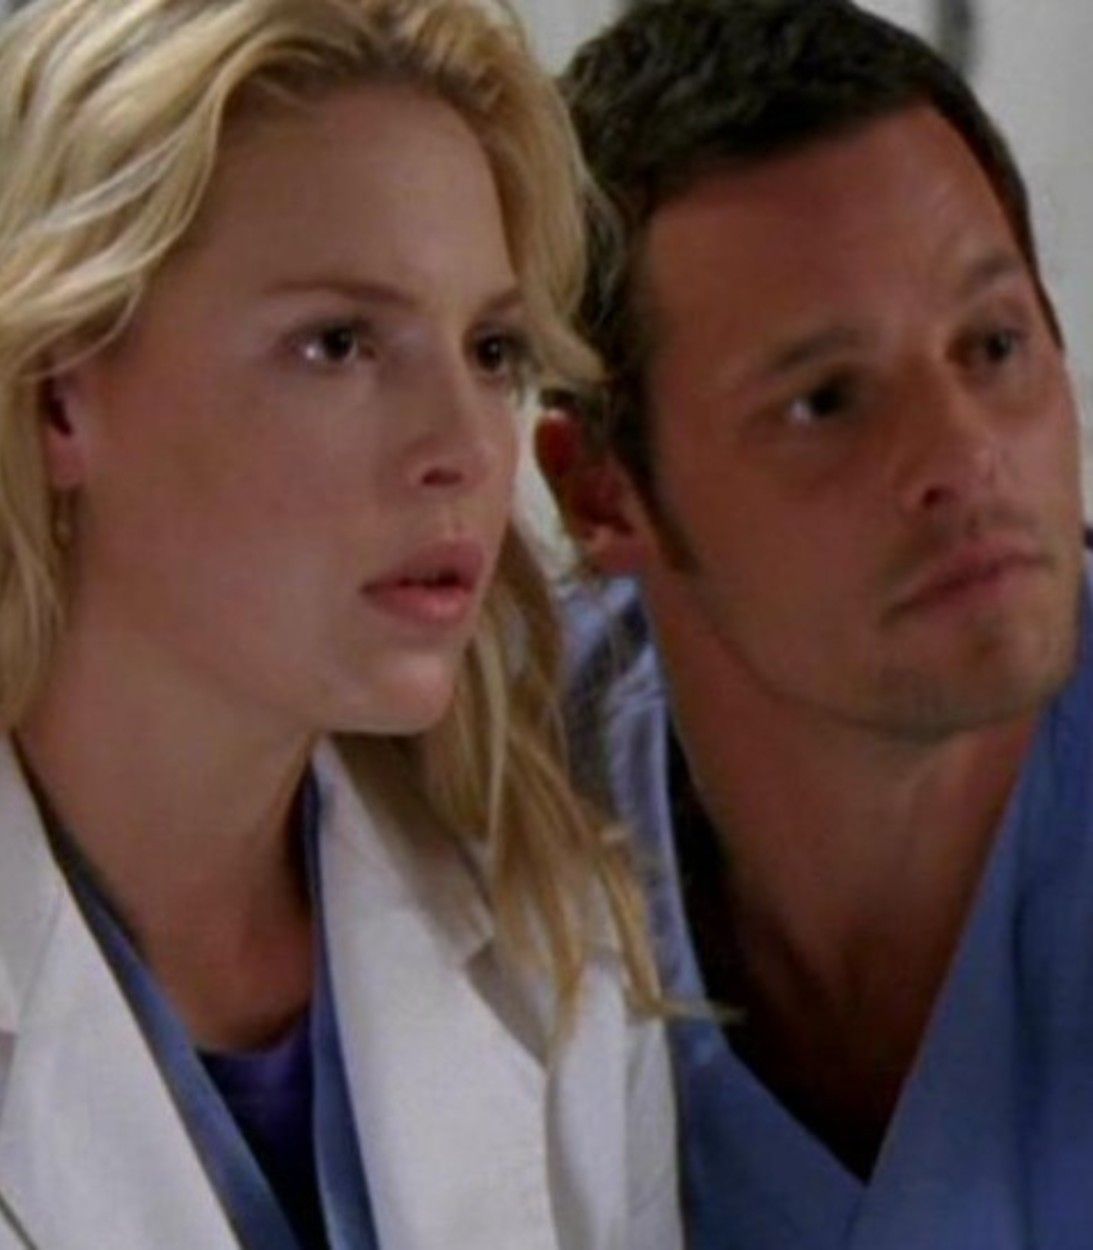 Alex and Izzie in Greys Anatomy pic vertical